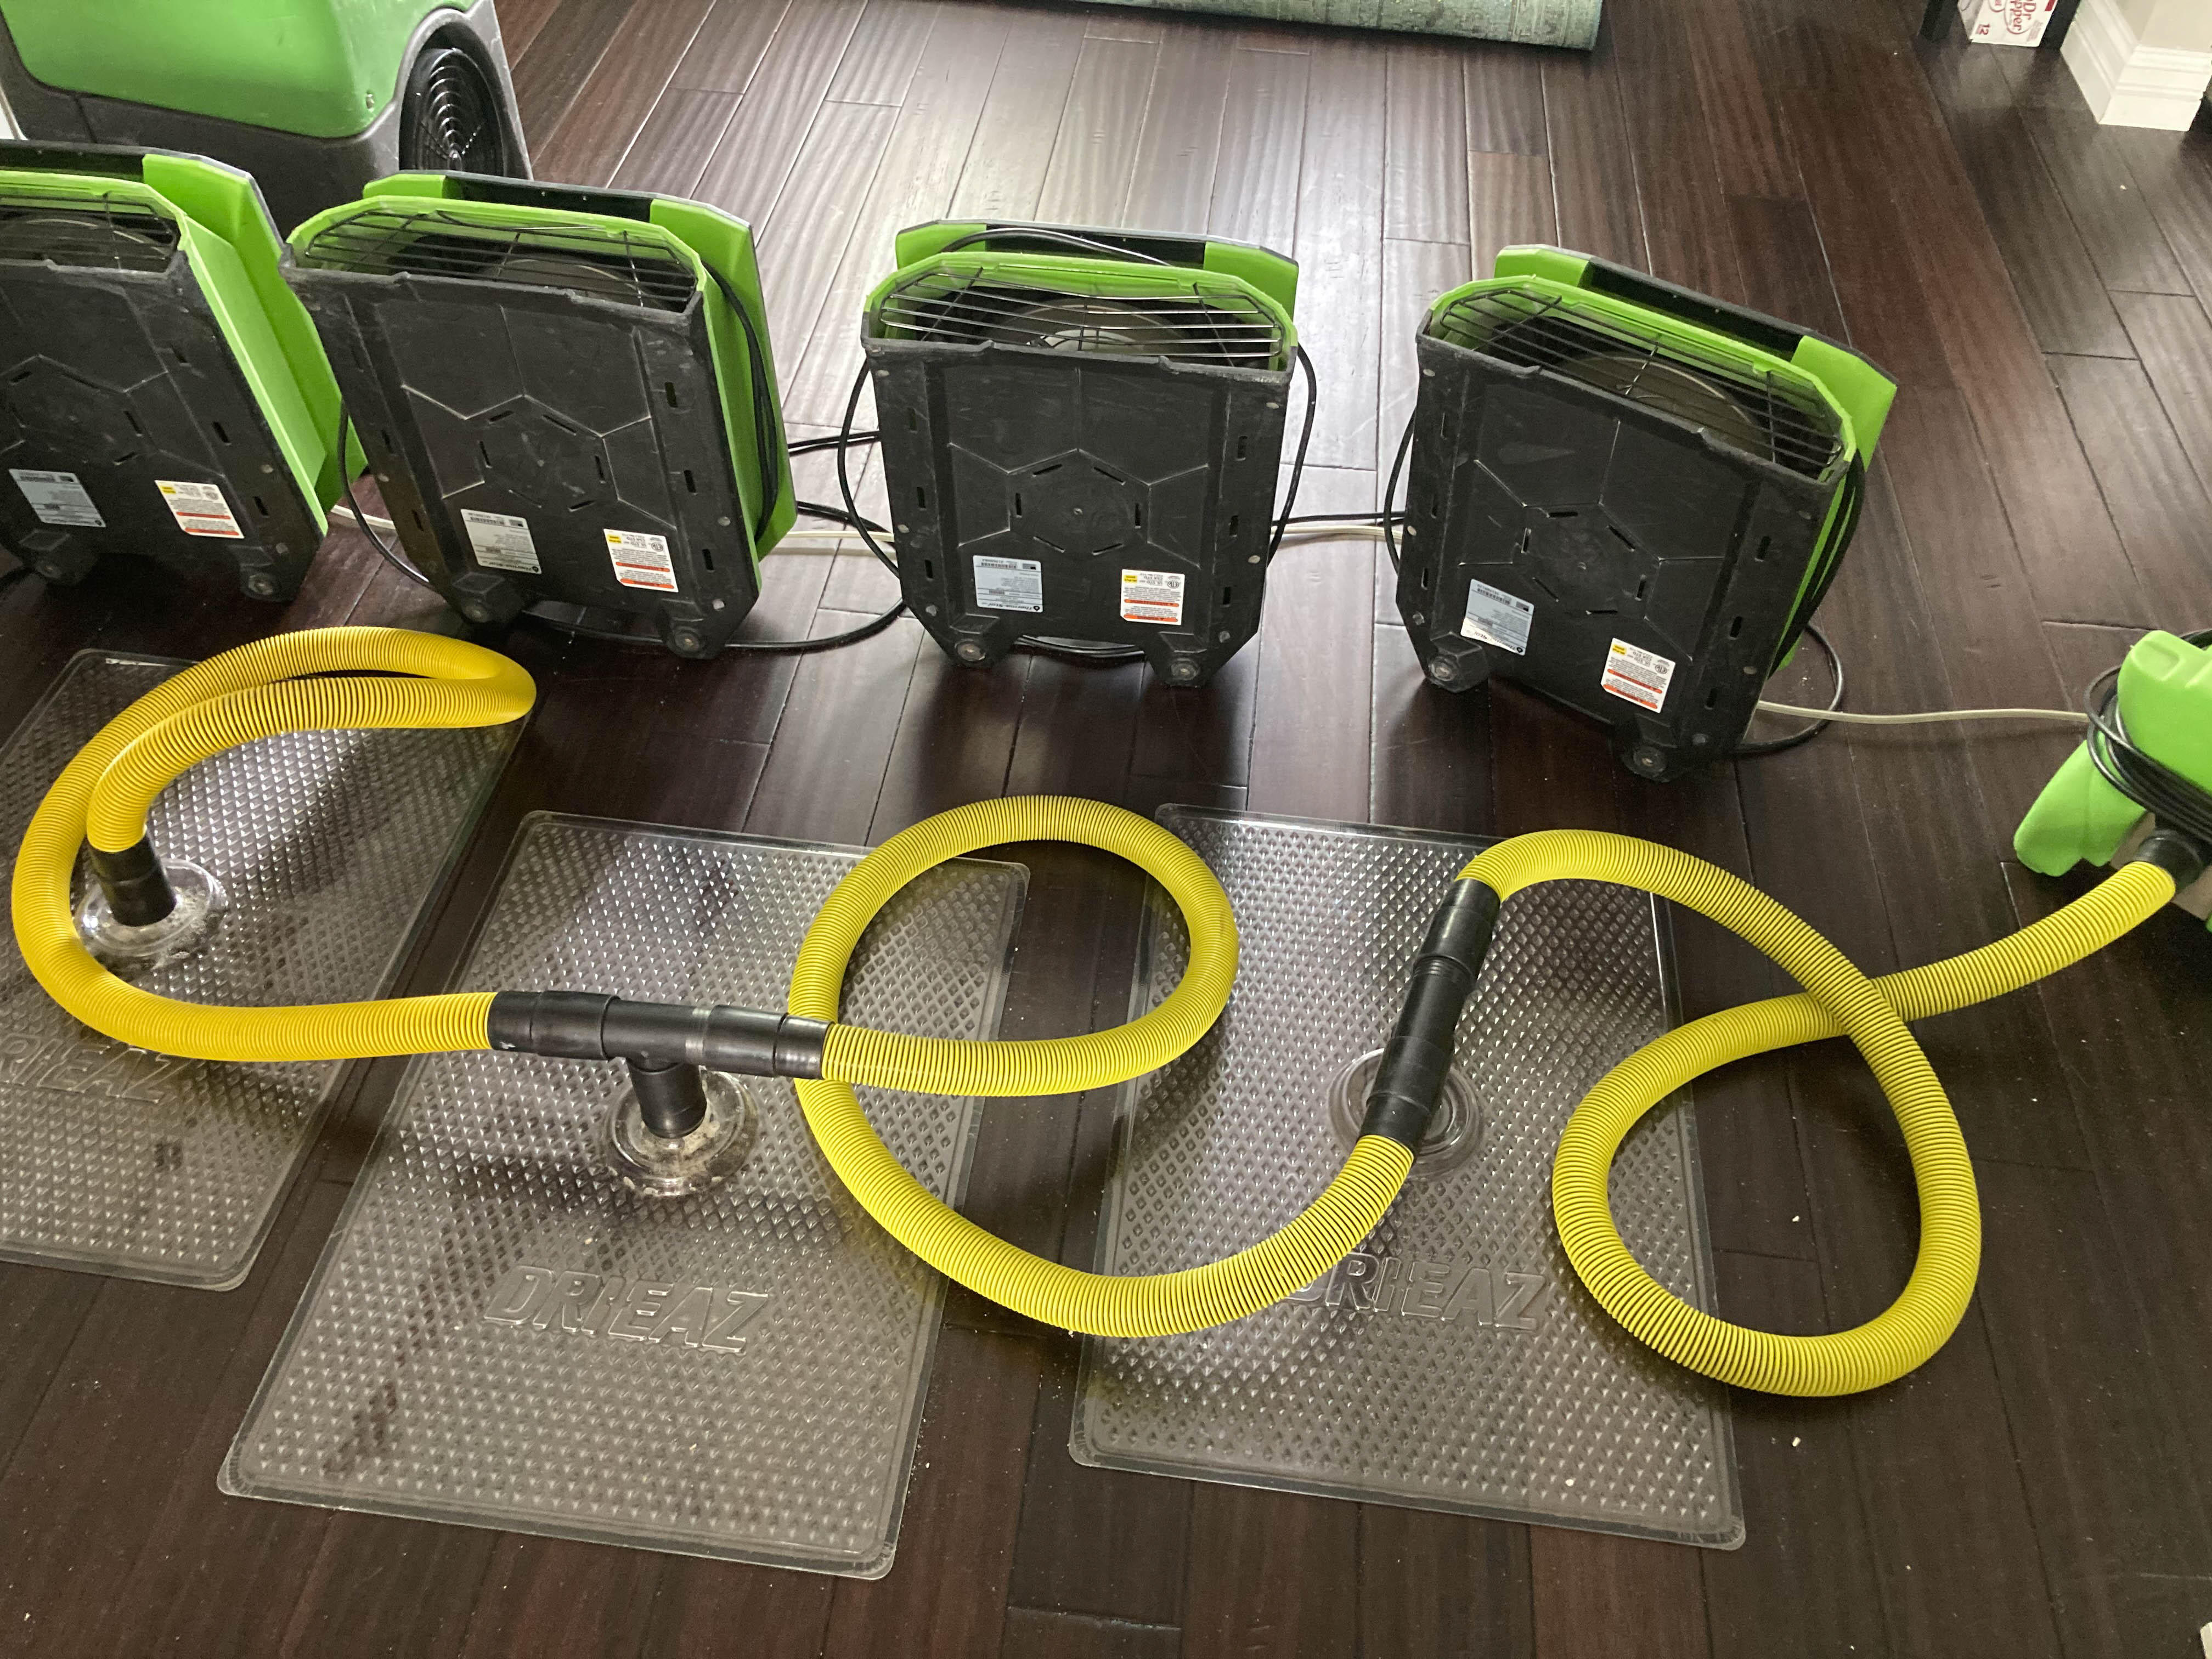 Our equipment, expertise and training makes SERVPRO of St. Louis County NW the first choice when residential and commercial water damage occurs. We are a call away to help!